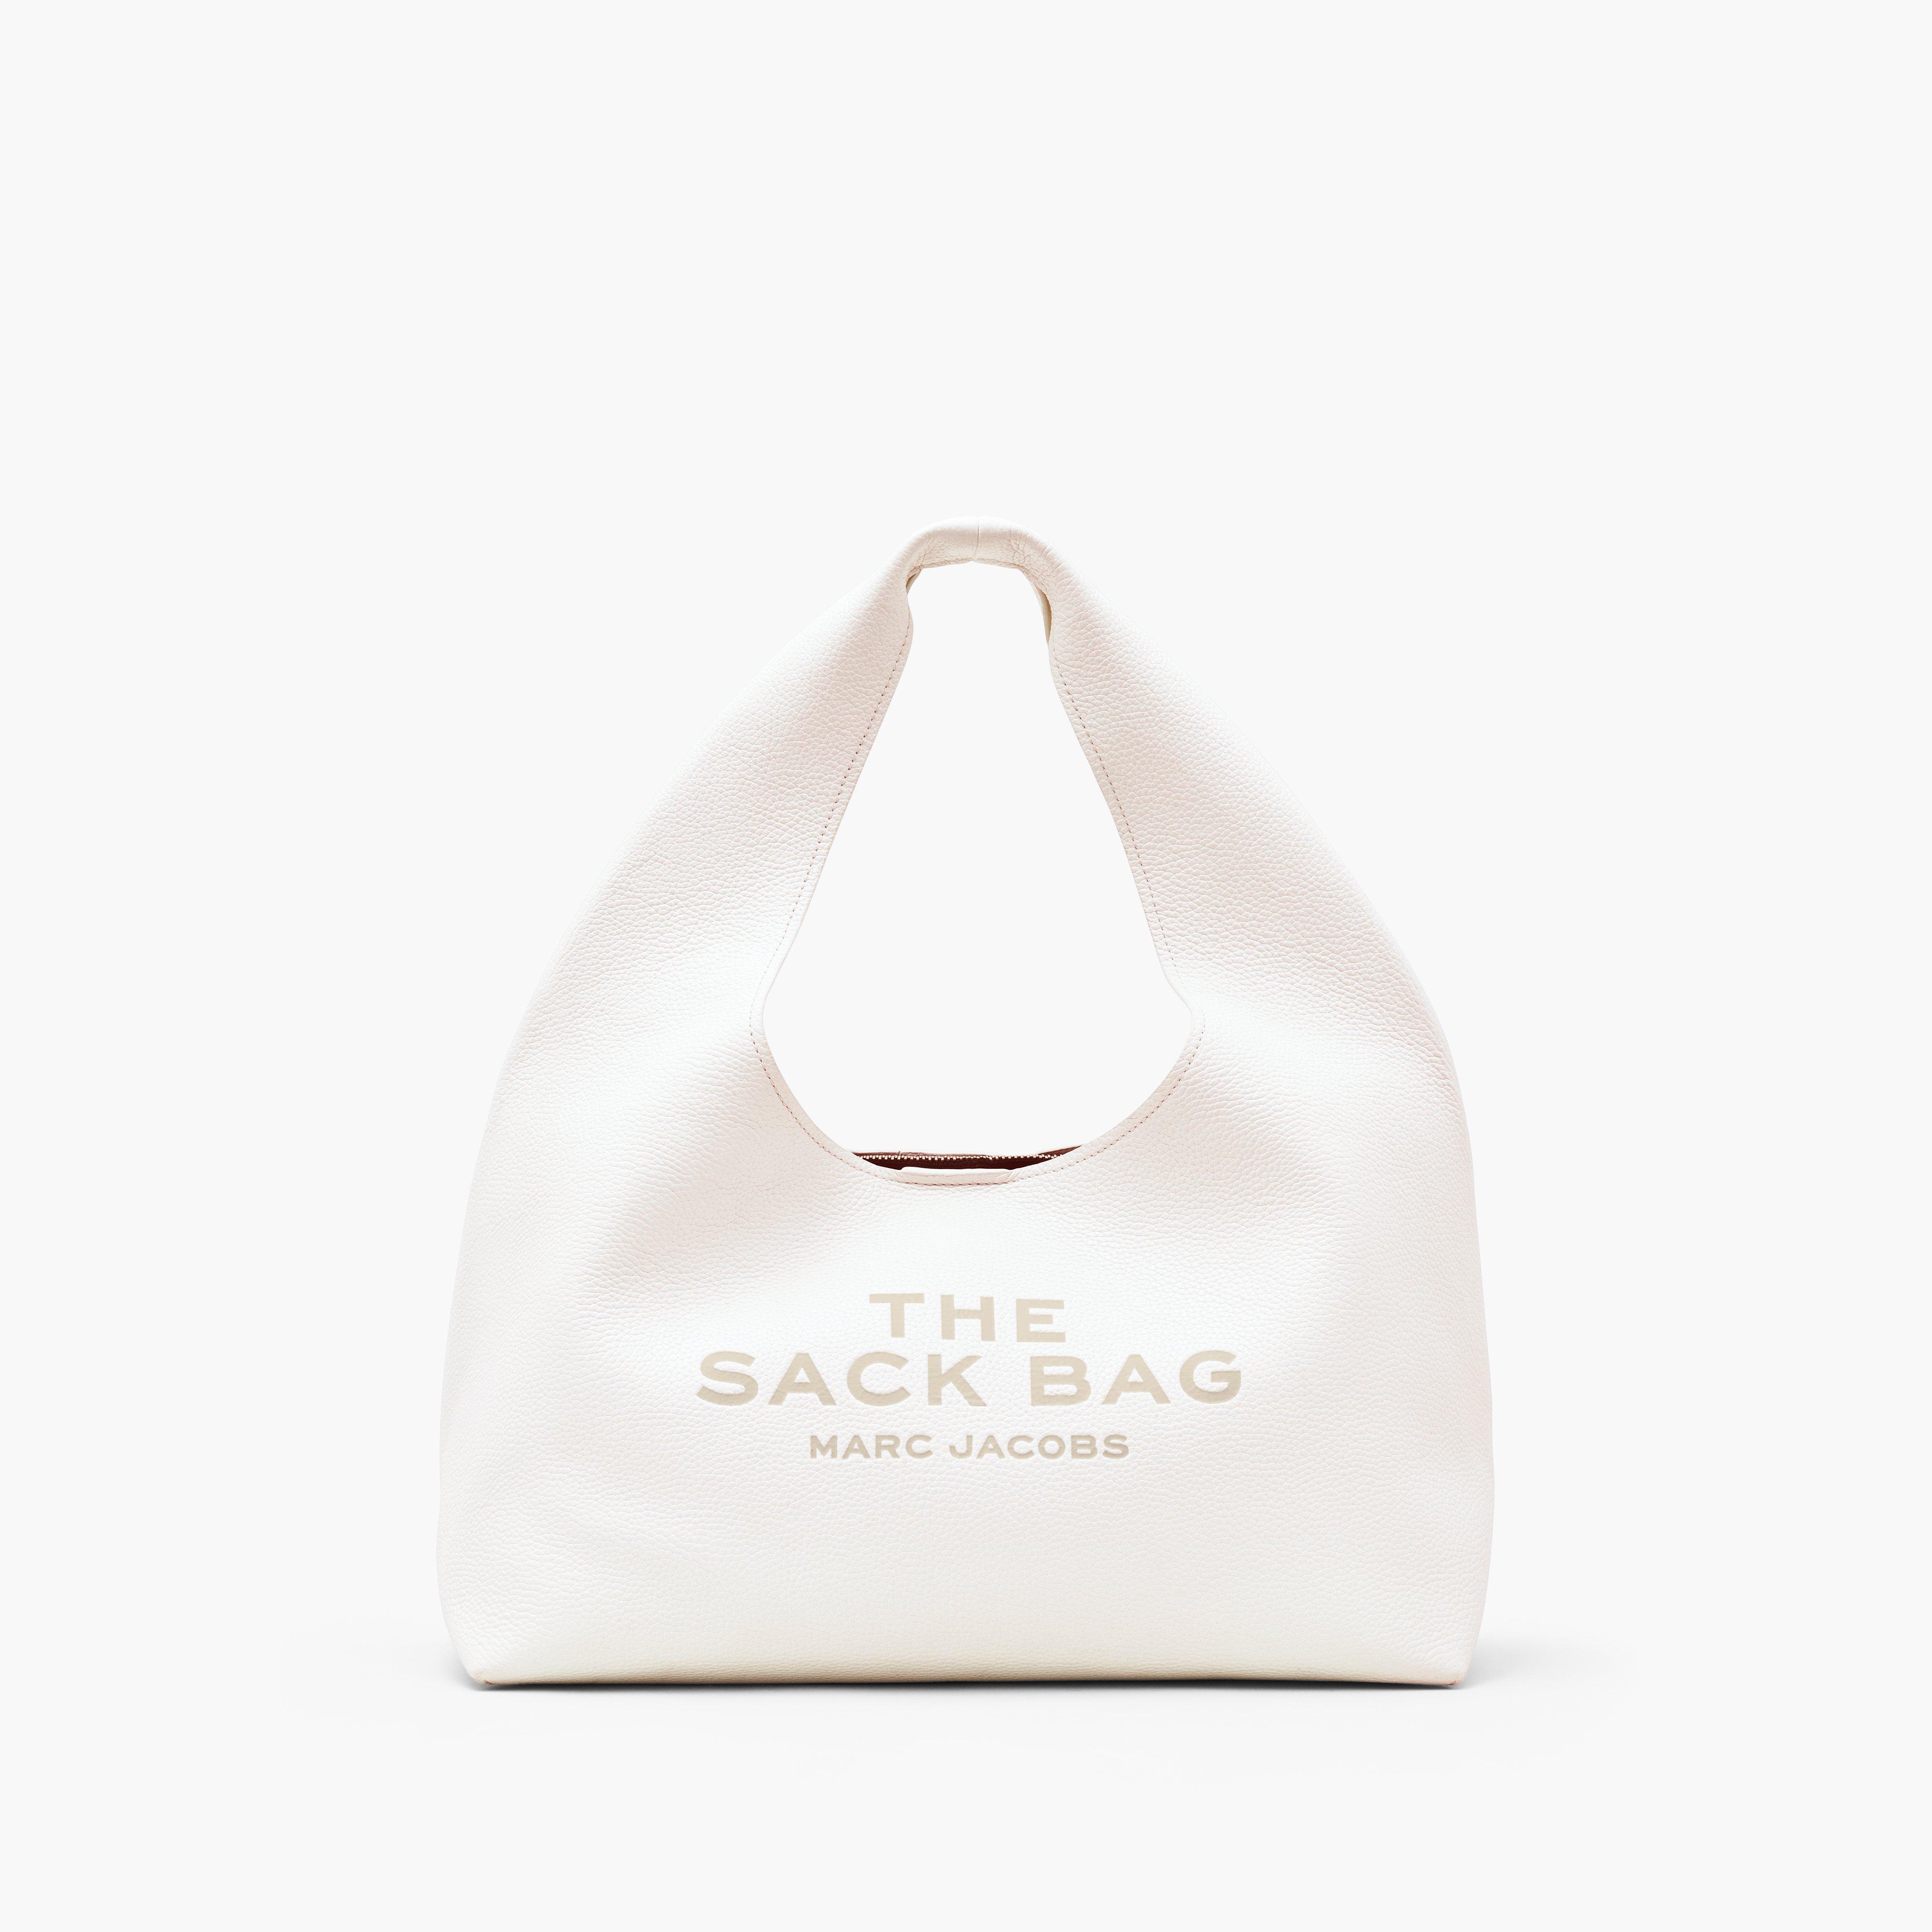 Marc by Marc jacobs The Sack Bag,WHITE